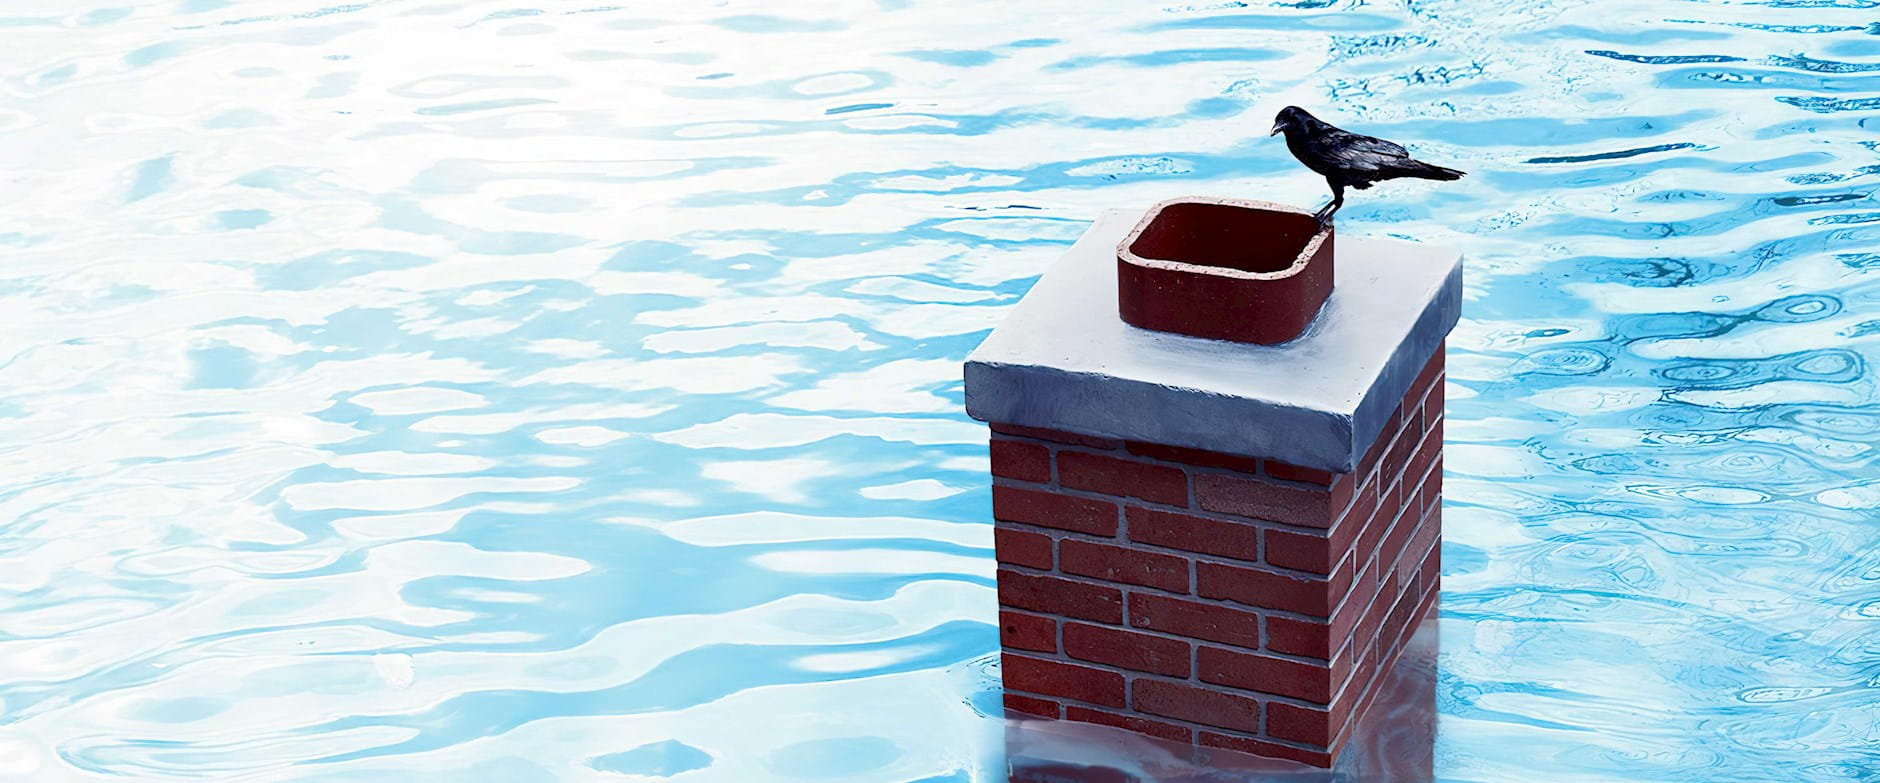 Chimney poking up through water with a bird on top